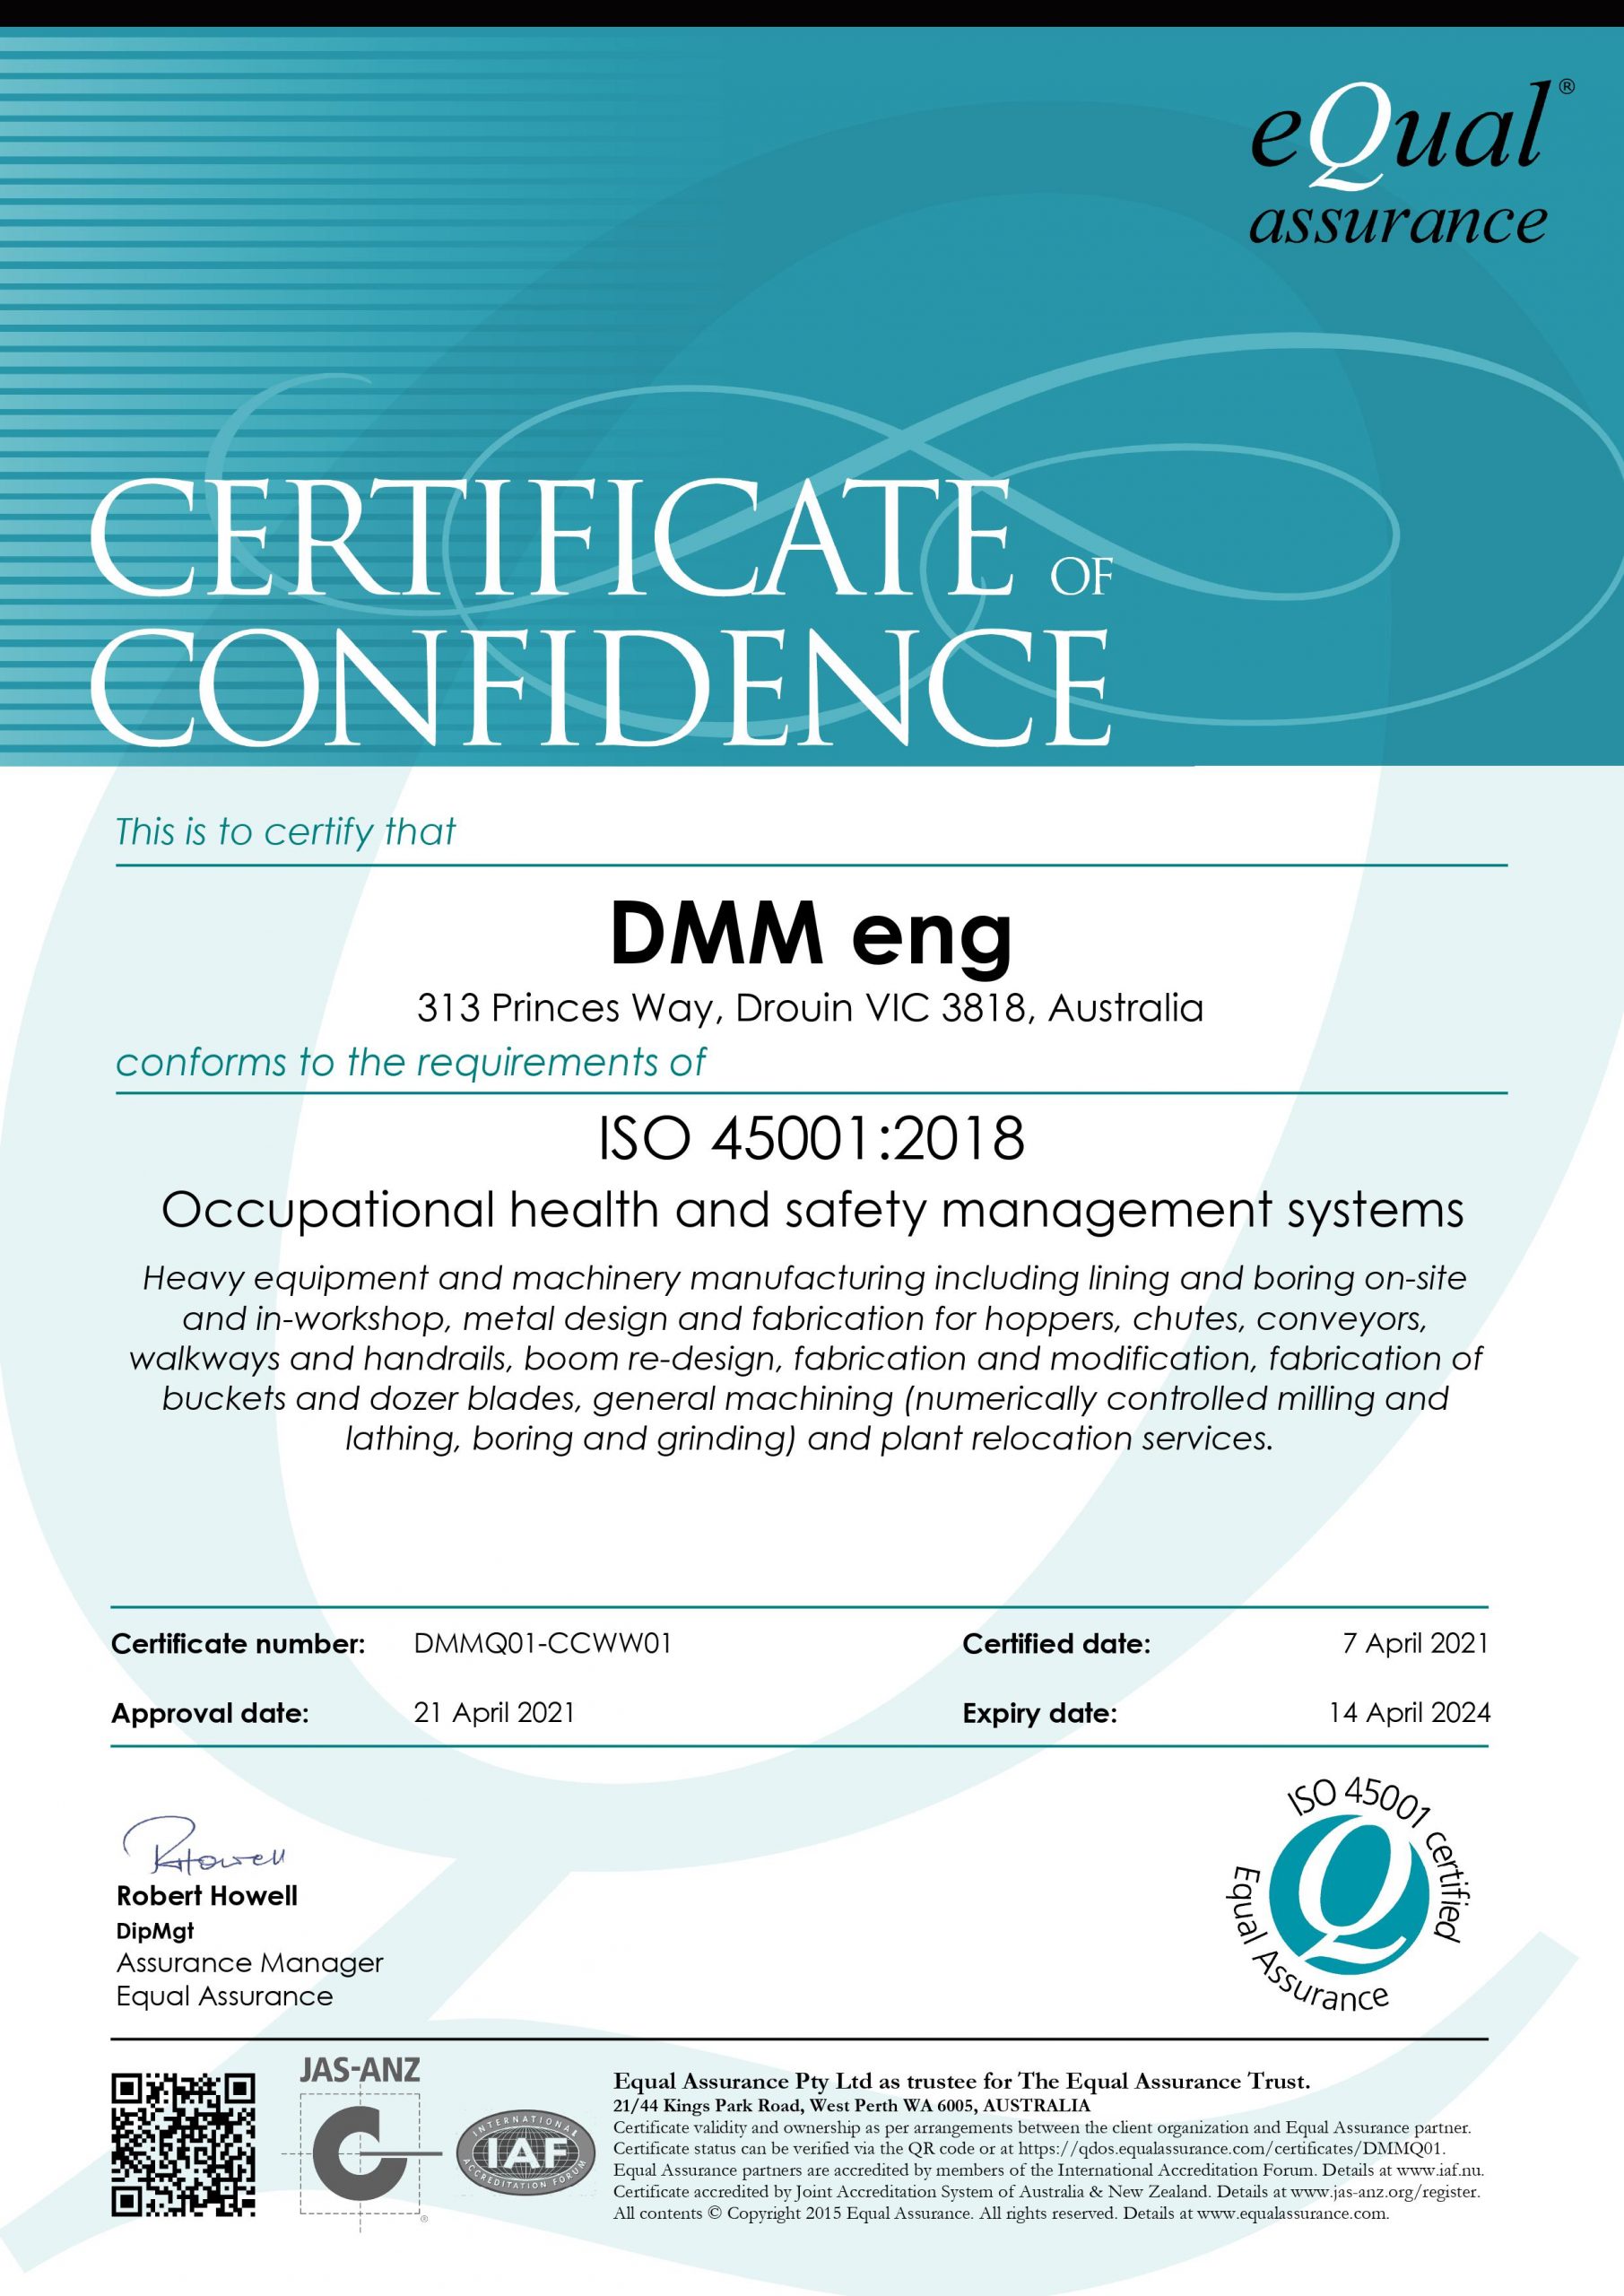 ISO 45001 - 2018